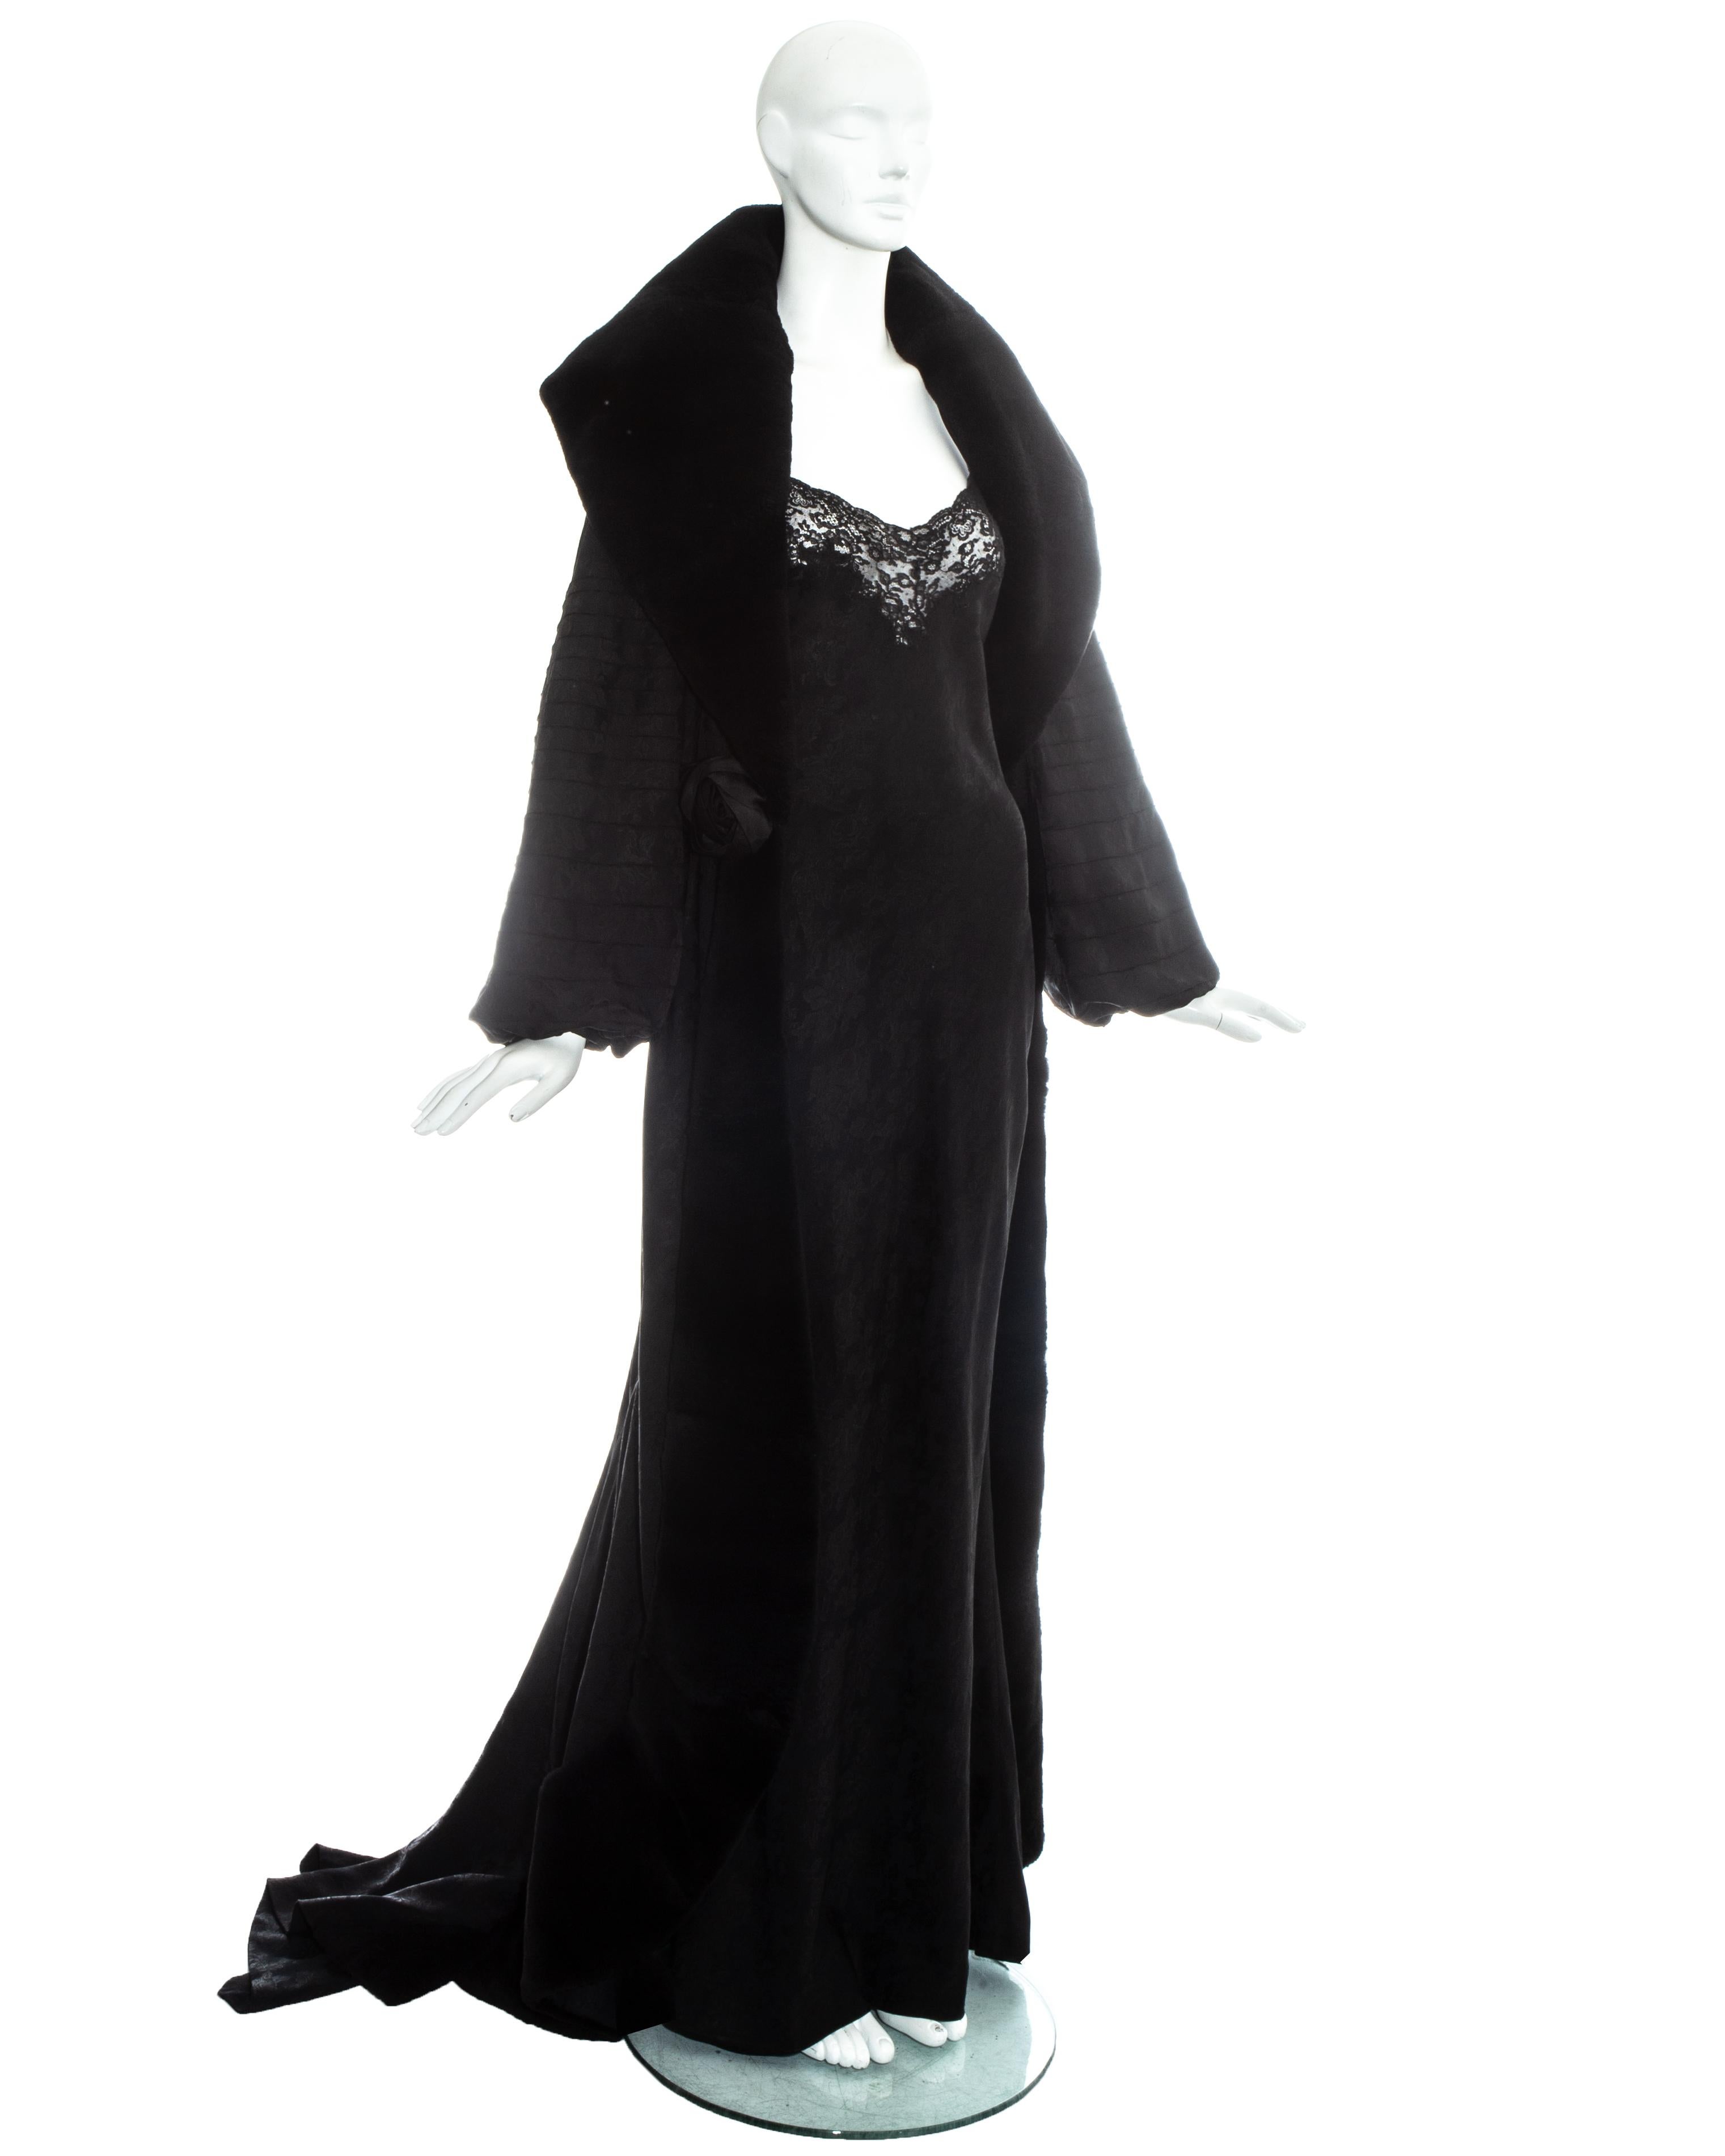 Christian Dior by John Galliano; Bias cut silk brocade evening maxi dress with spaghetti straps and lace trim around bust. 1930s style evening robe in matching silk brocade with large sheared beaver fur collar and trim.   

- long pointed train 
-